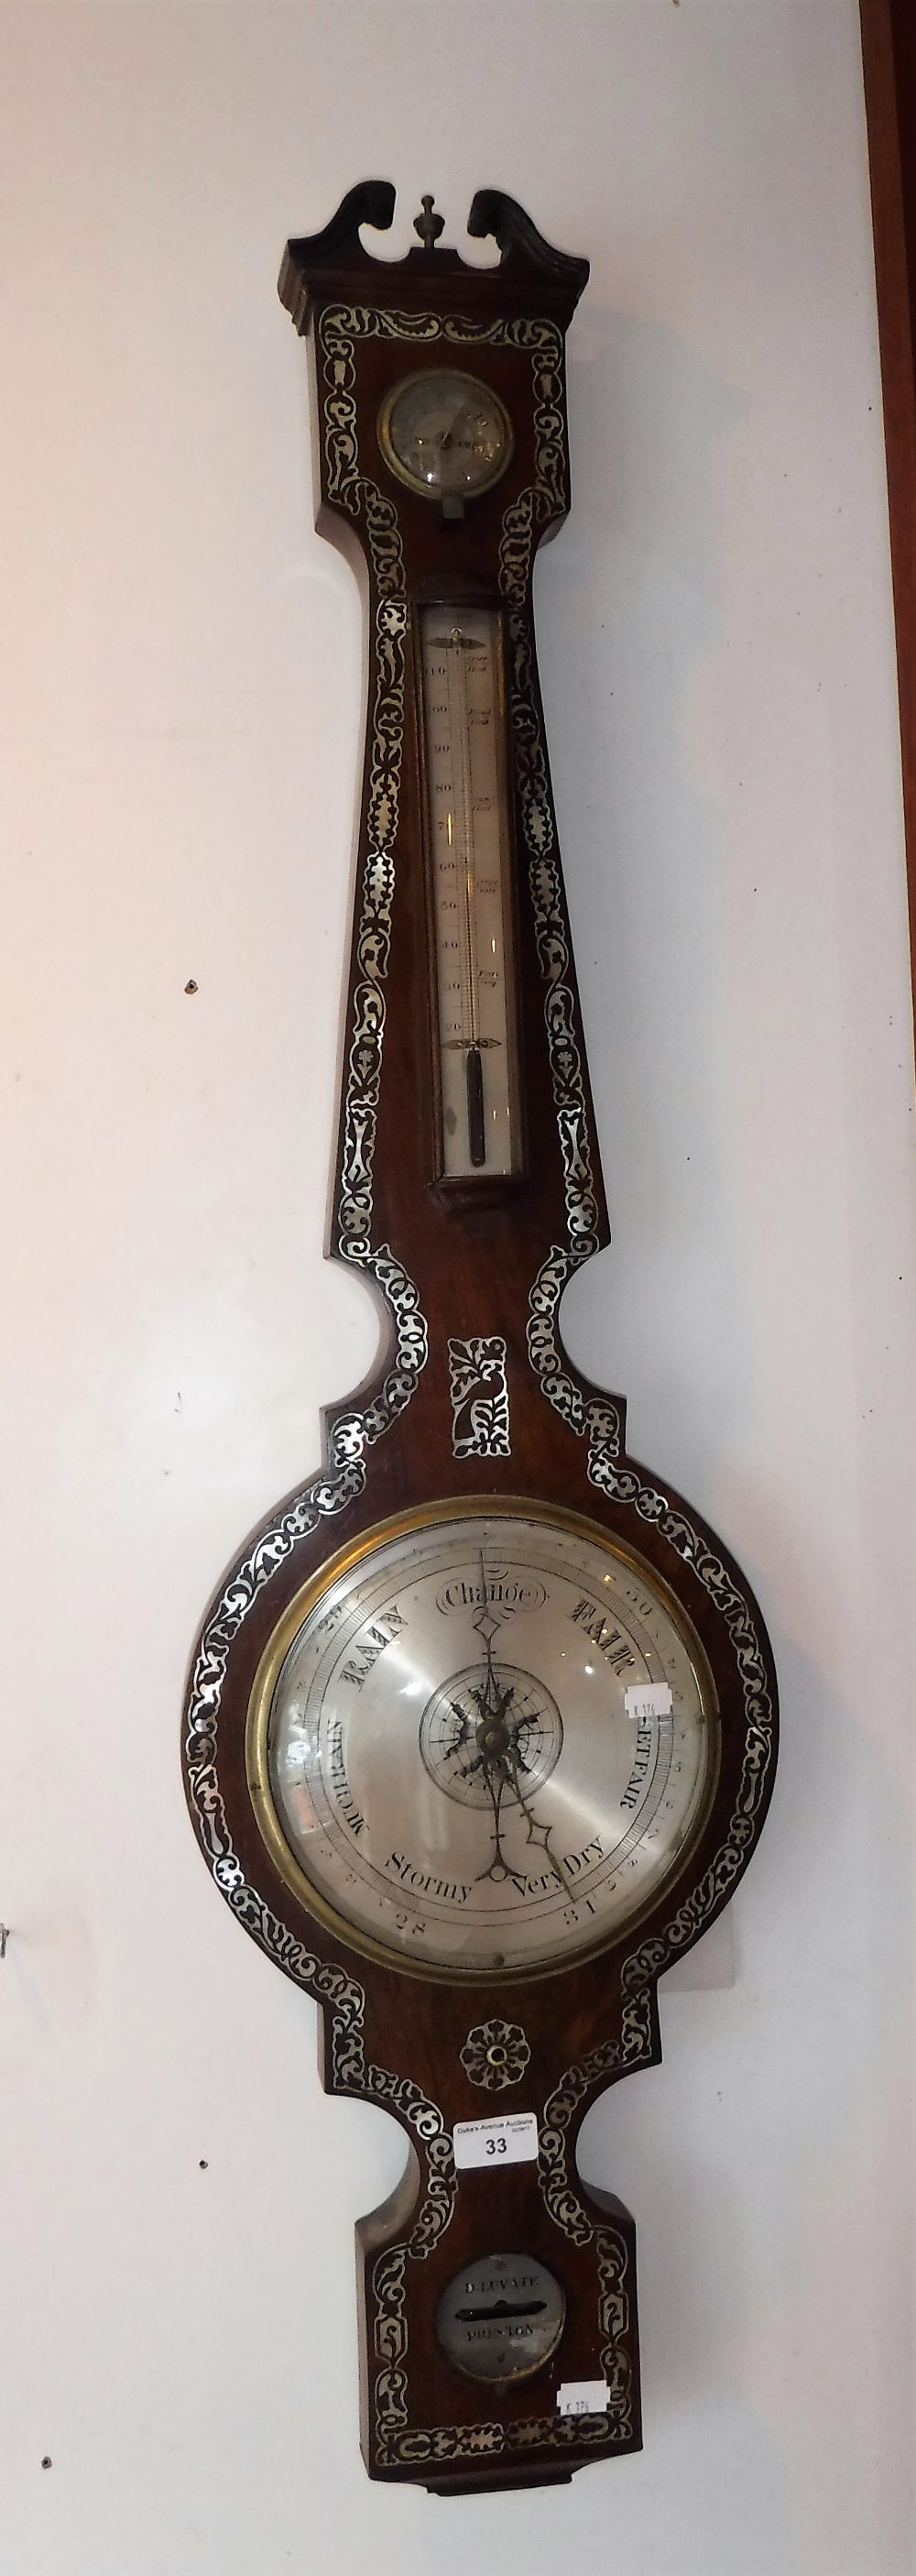 A REGENCY ROSEWOOD WHEEL BAROMETER with mother-of-pearl inlay decoration and signed 'D. Luvate,